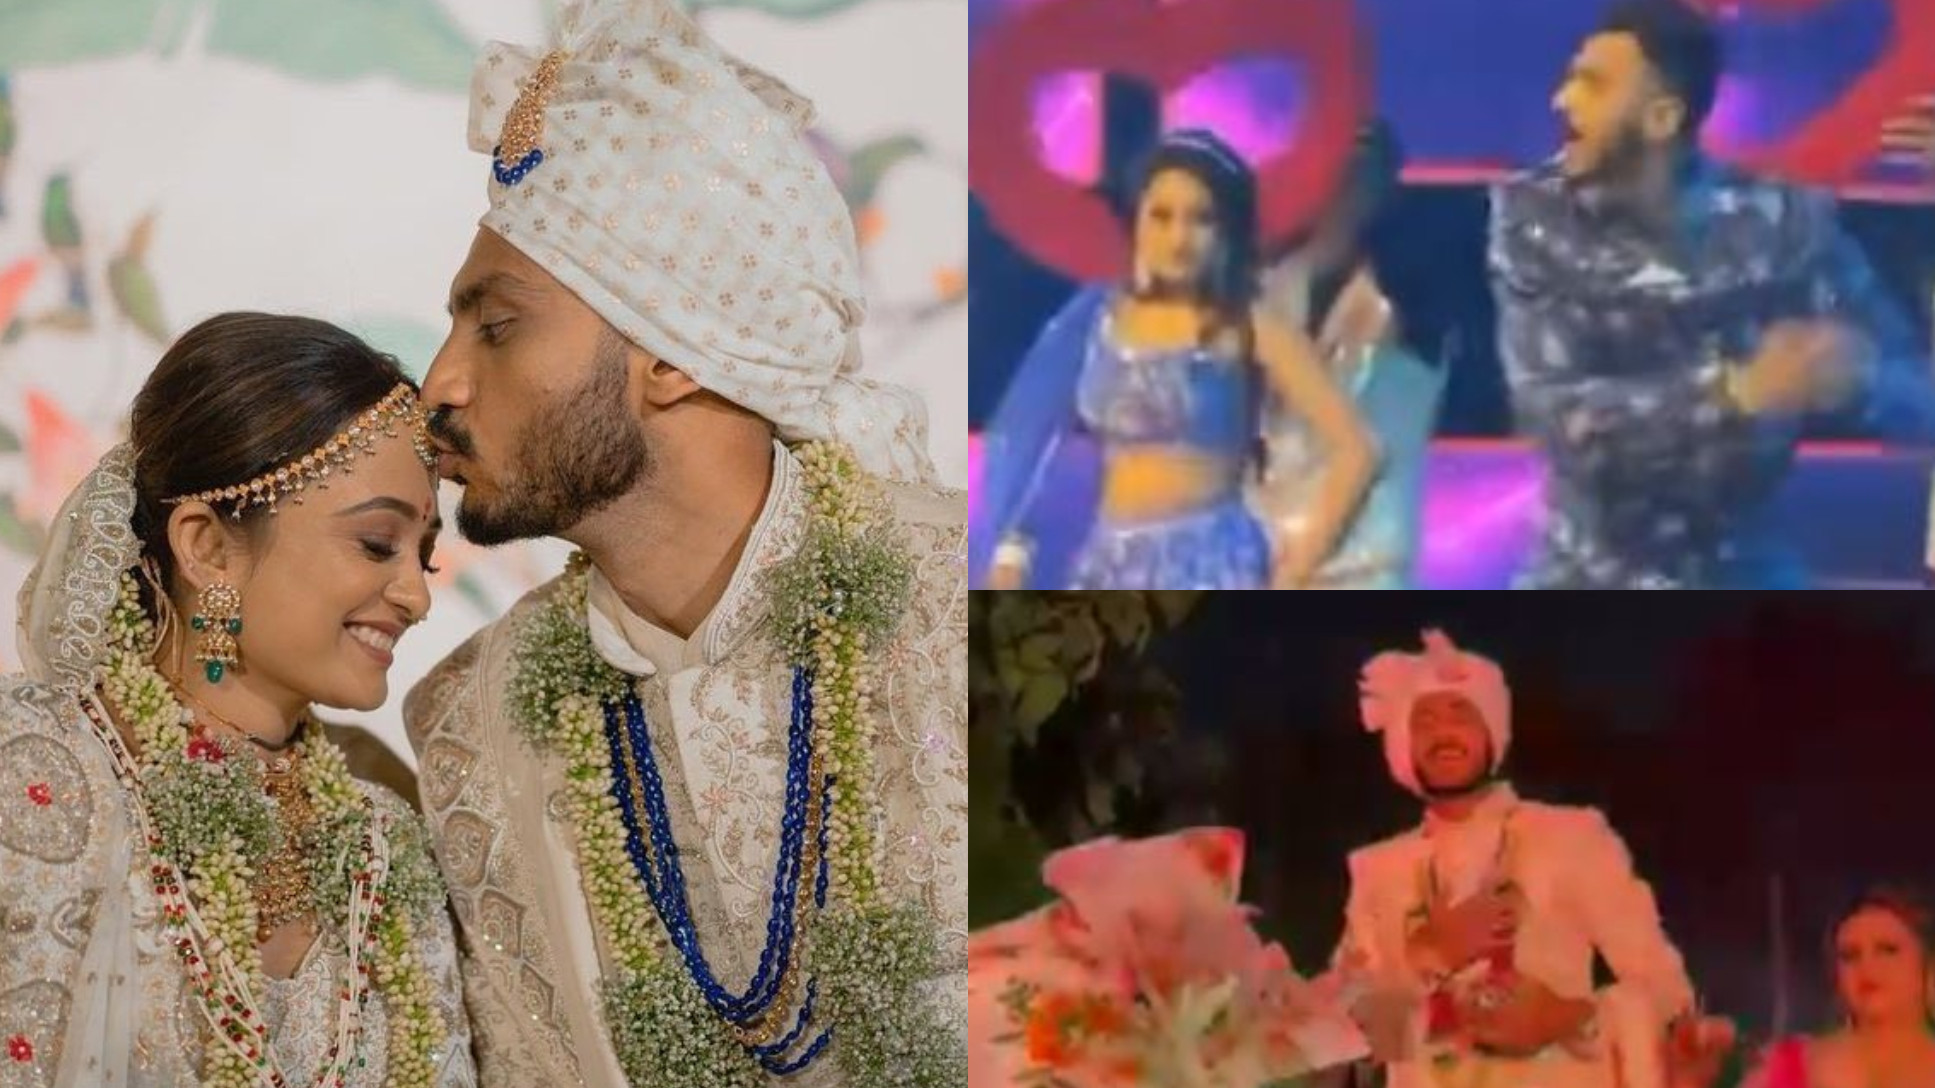 WATCH- Akshar Patel marries fiancee Meha; shows off his dance moves in the wedding functions